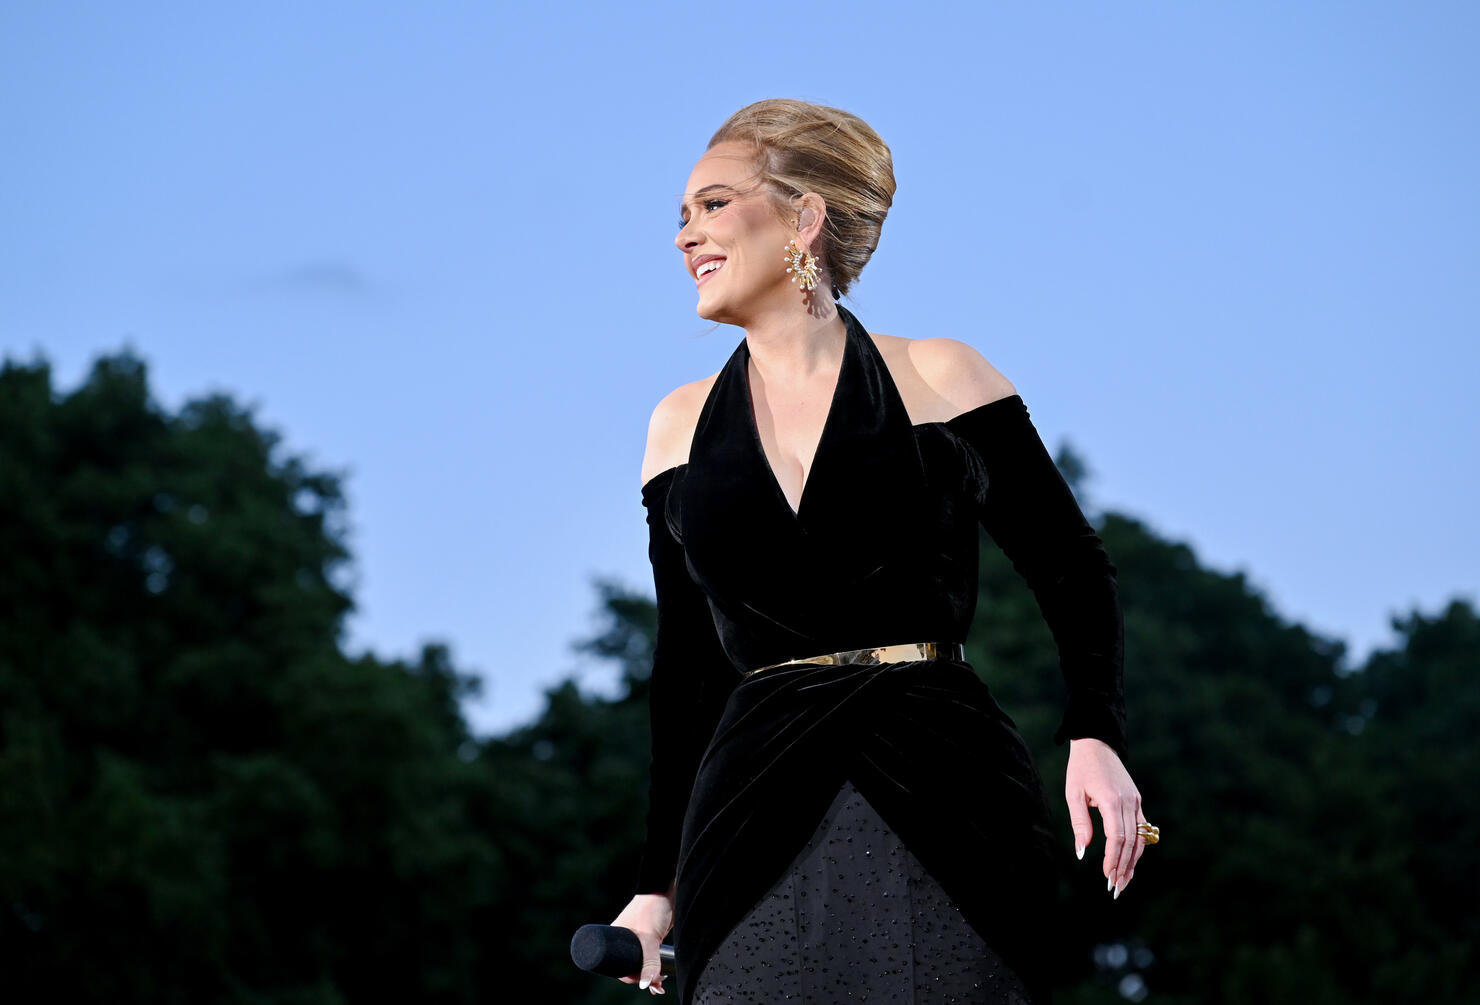 American Express Presents BST Hyde Park: Adele